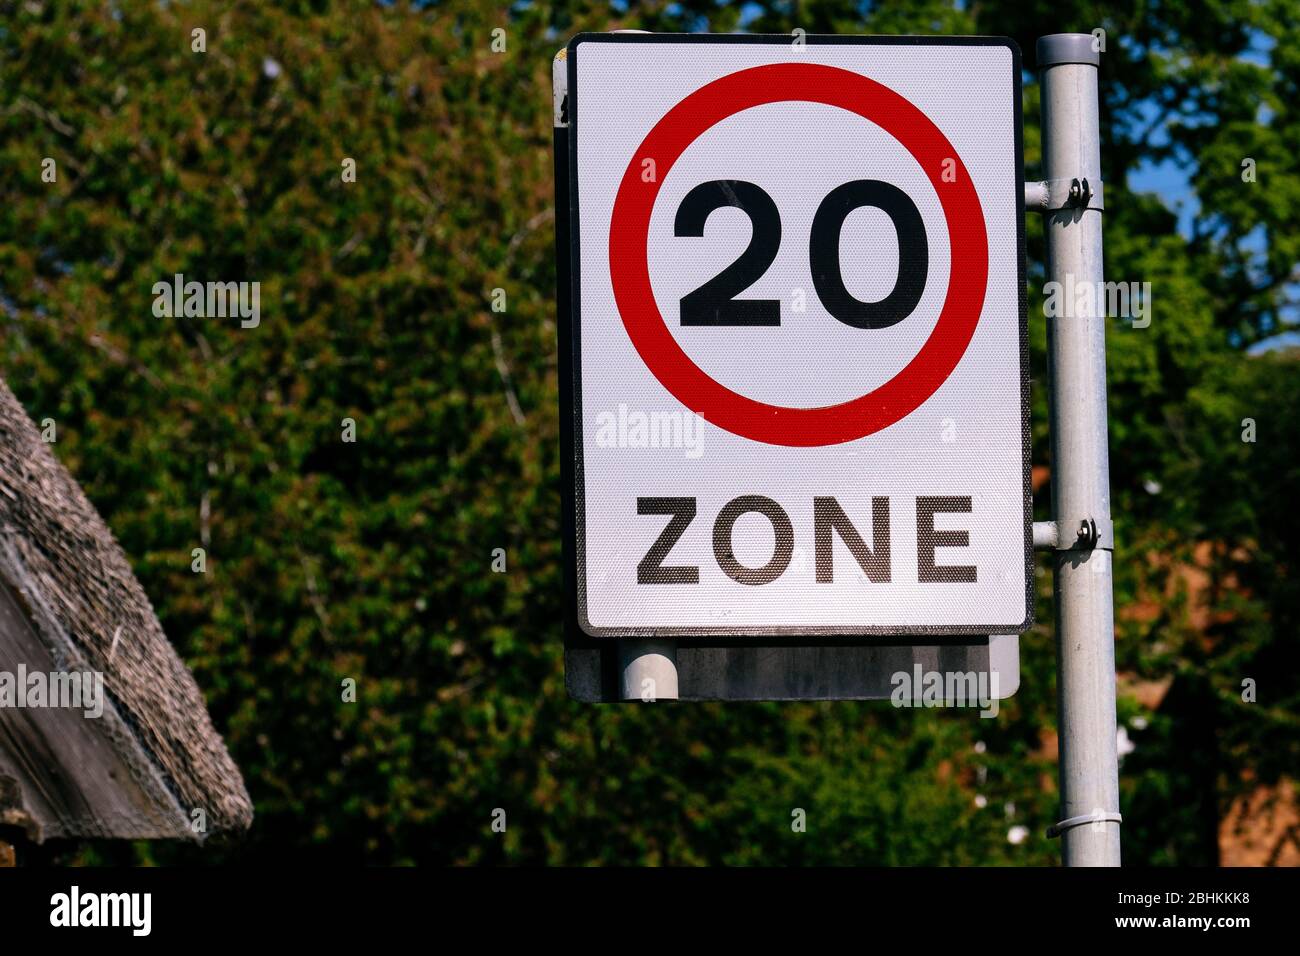 20 miles per hour zone sign in Bugbrooke, Northamptonshire Stock Photo